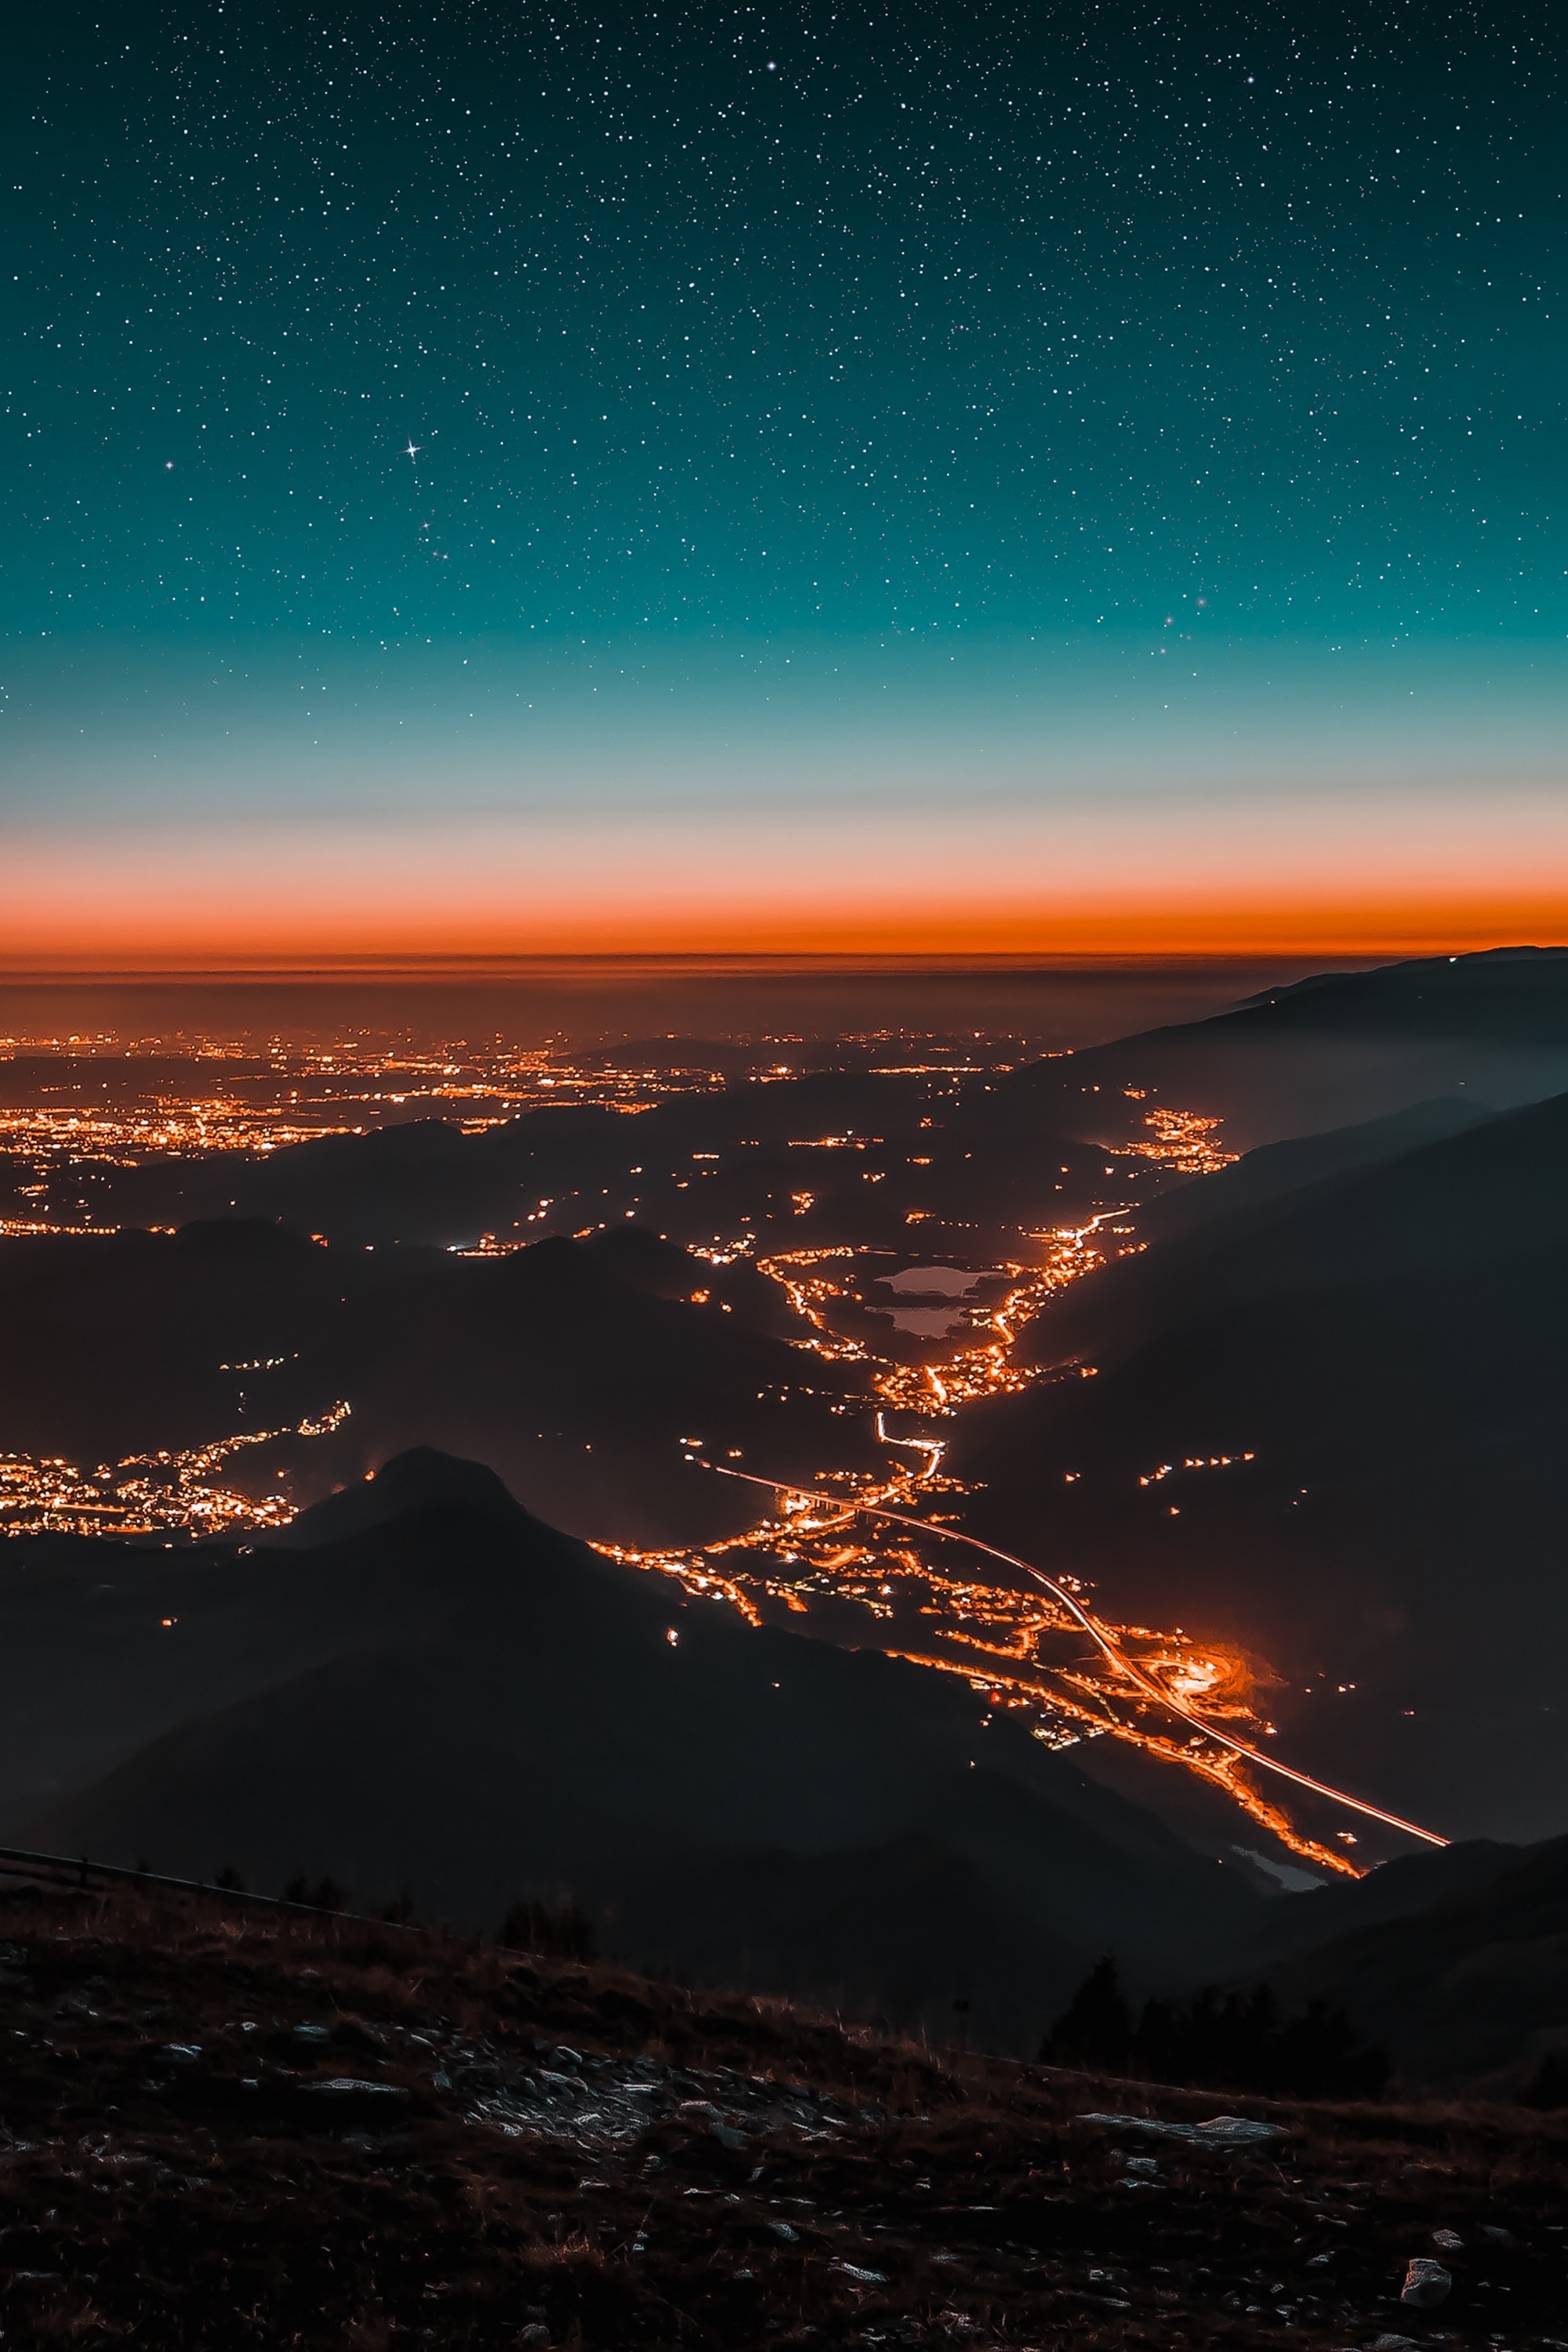 Free HD lights, night city, starry sky, cities, mountains, view from above